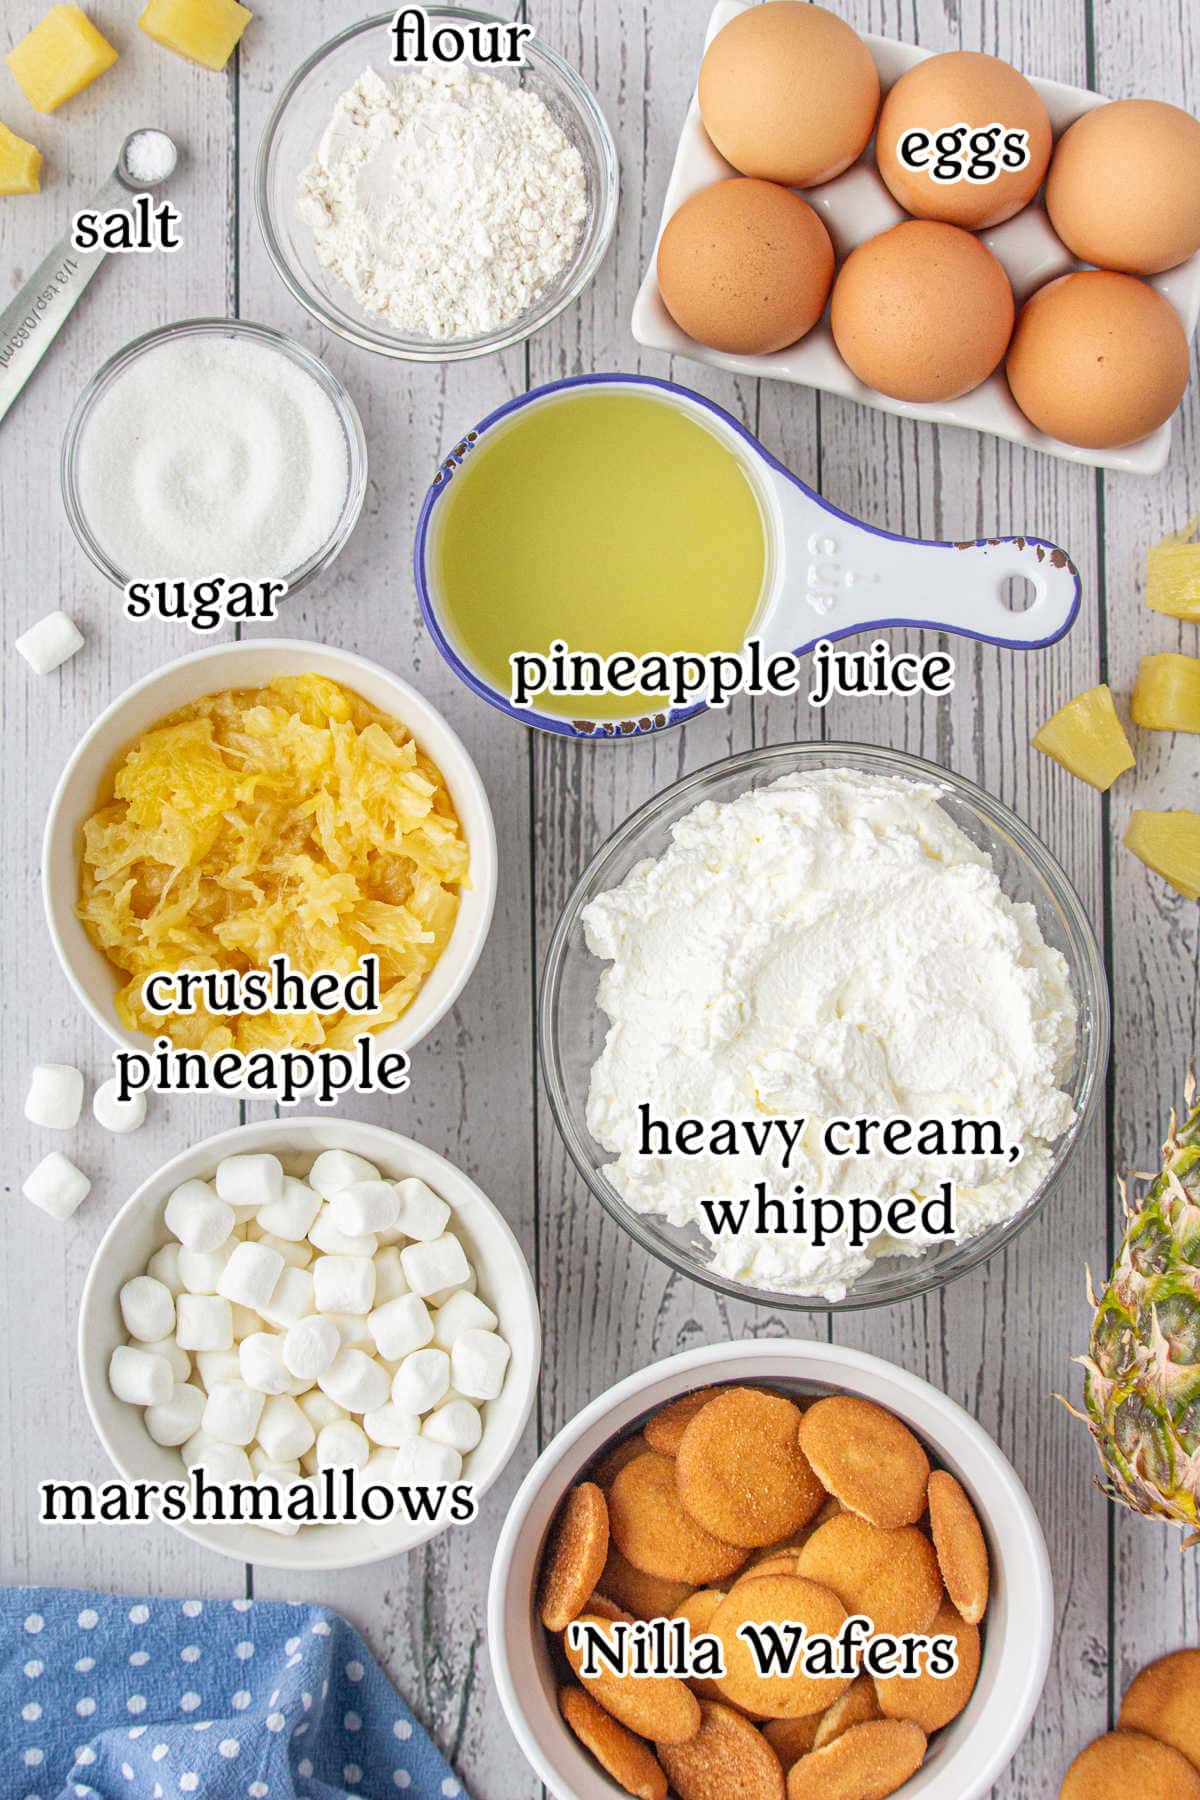 Labeled ingredients for fluffy pineapple pie.